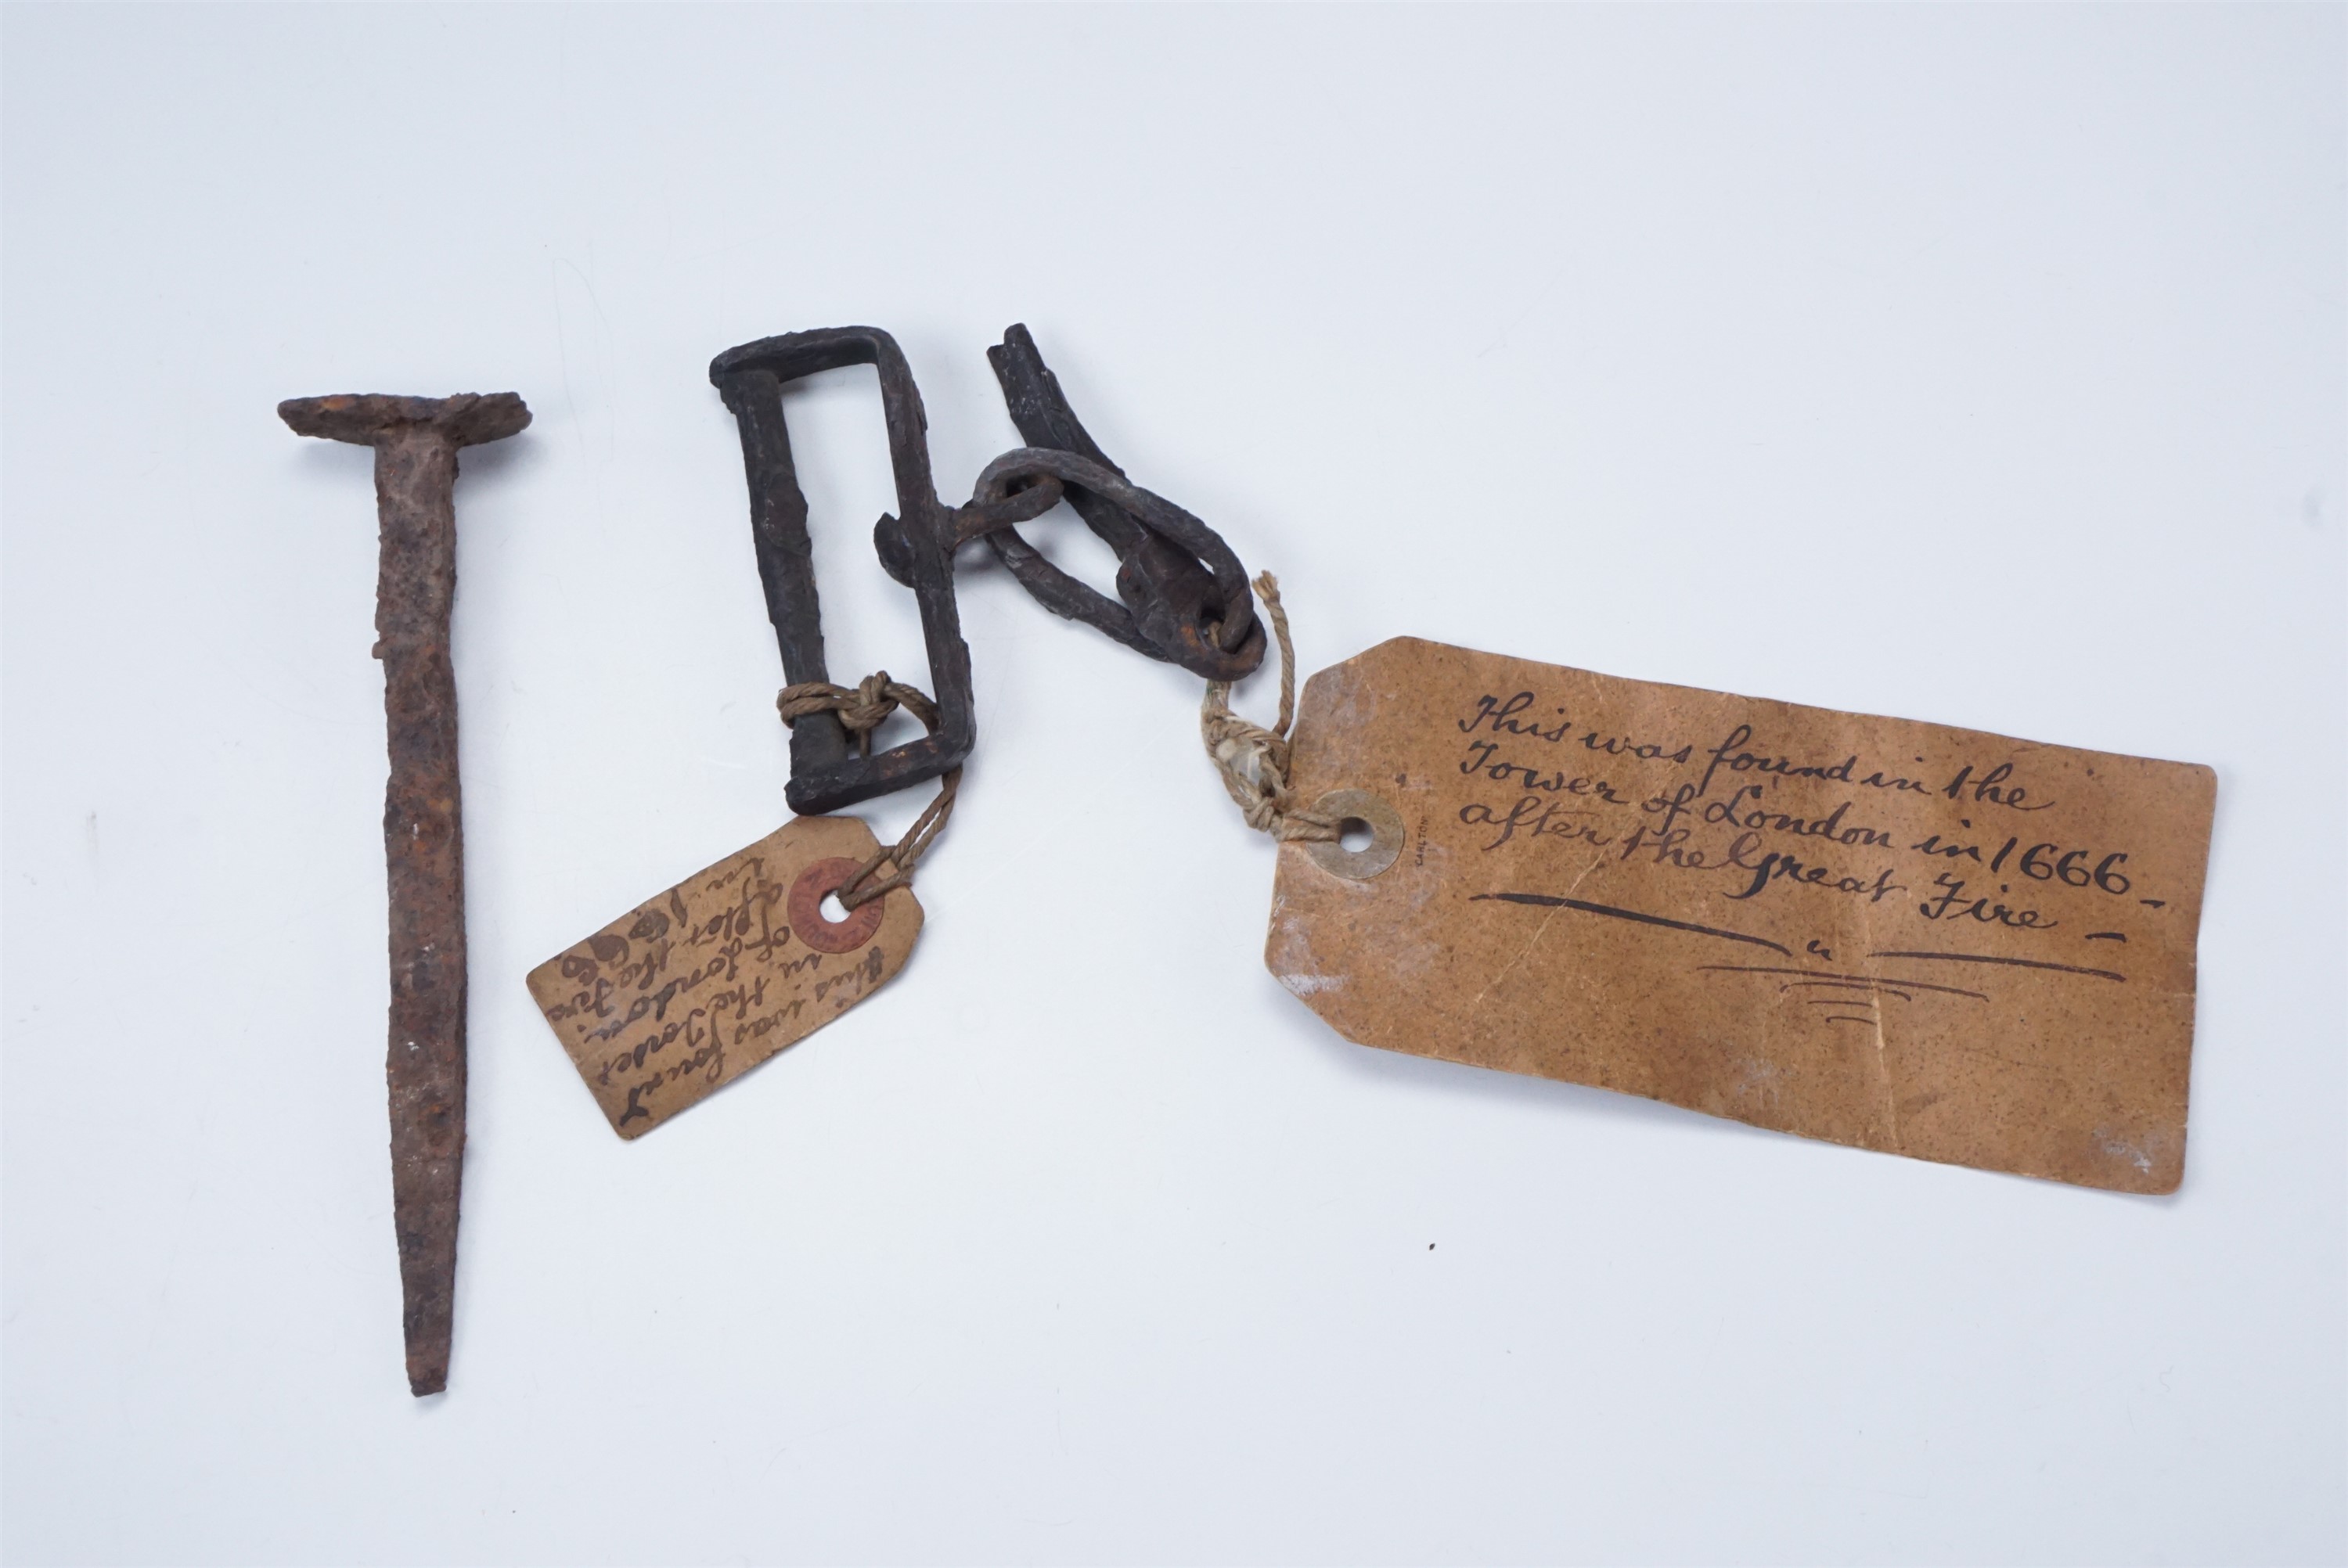 A wrought iron relic bearing inscribed labels stating it was found at the Tower of London in 1666